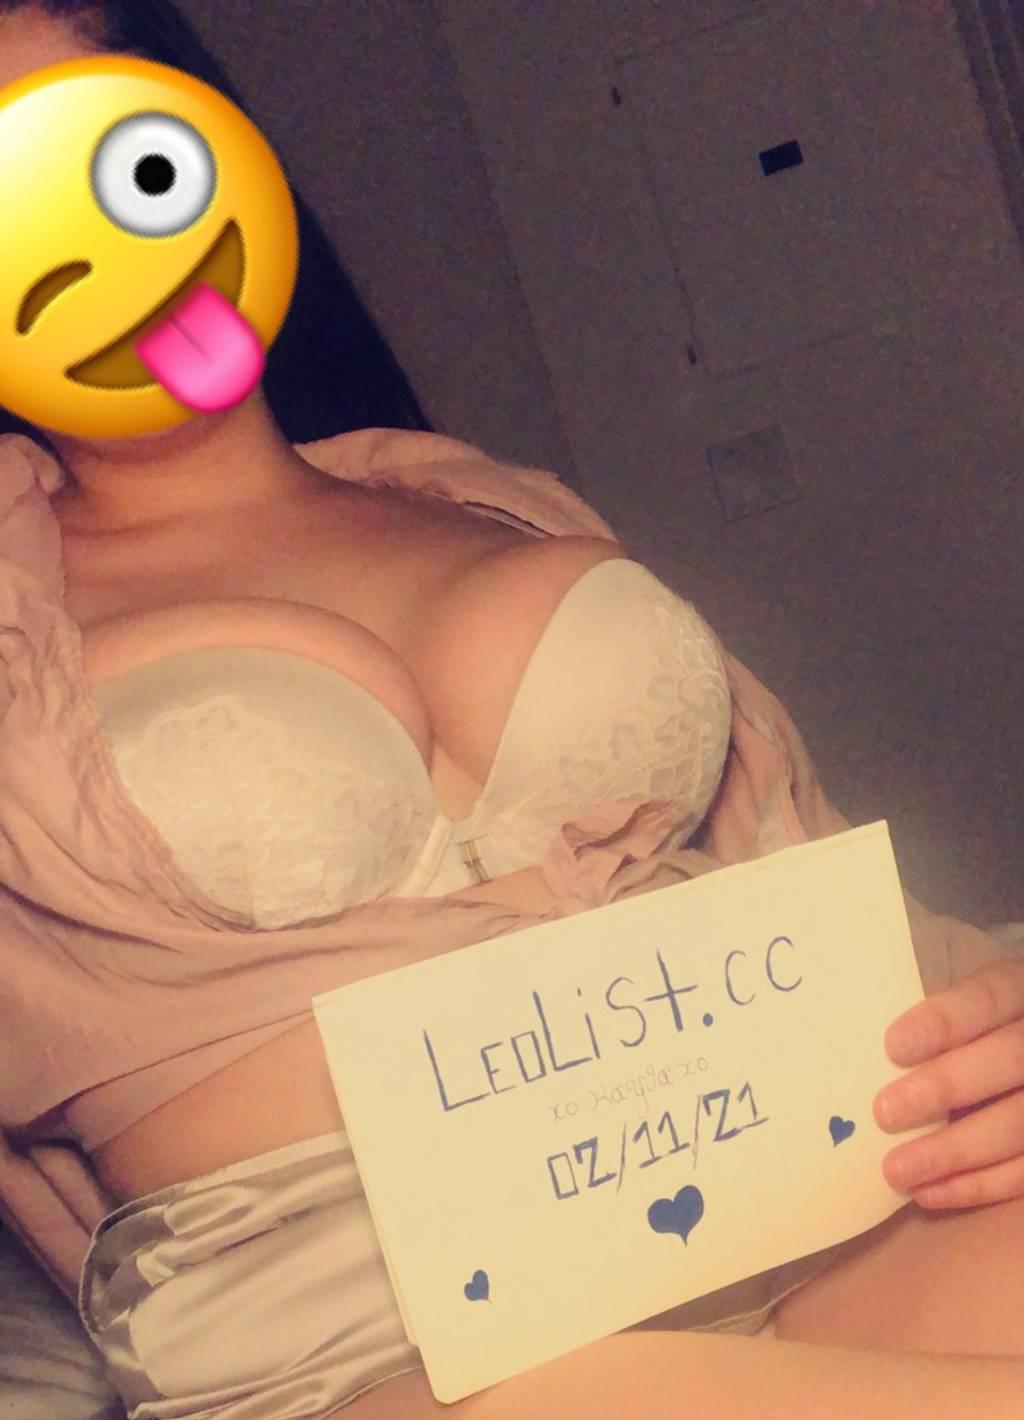 Kayla snow Open Minded is Female Escorts. | Guelph | Ontario | Canada | scarletamour.com 